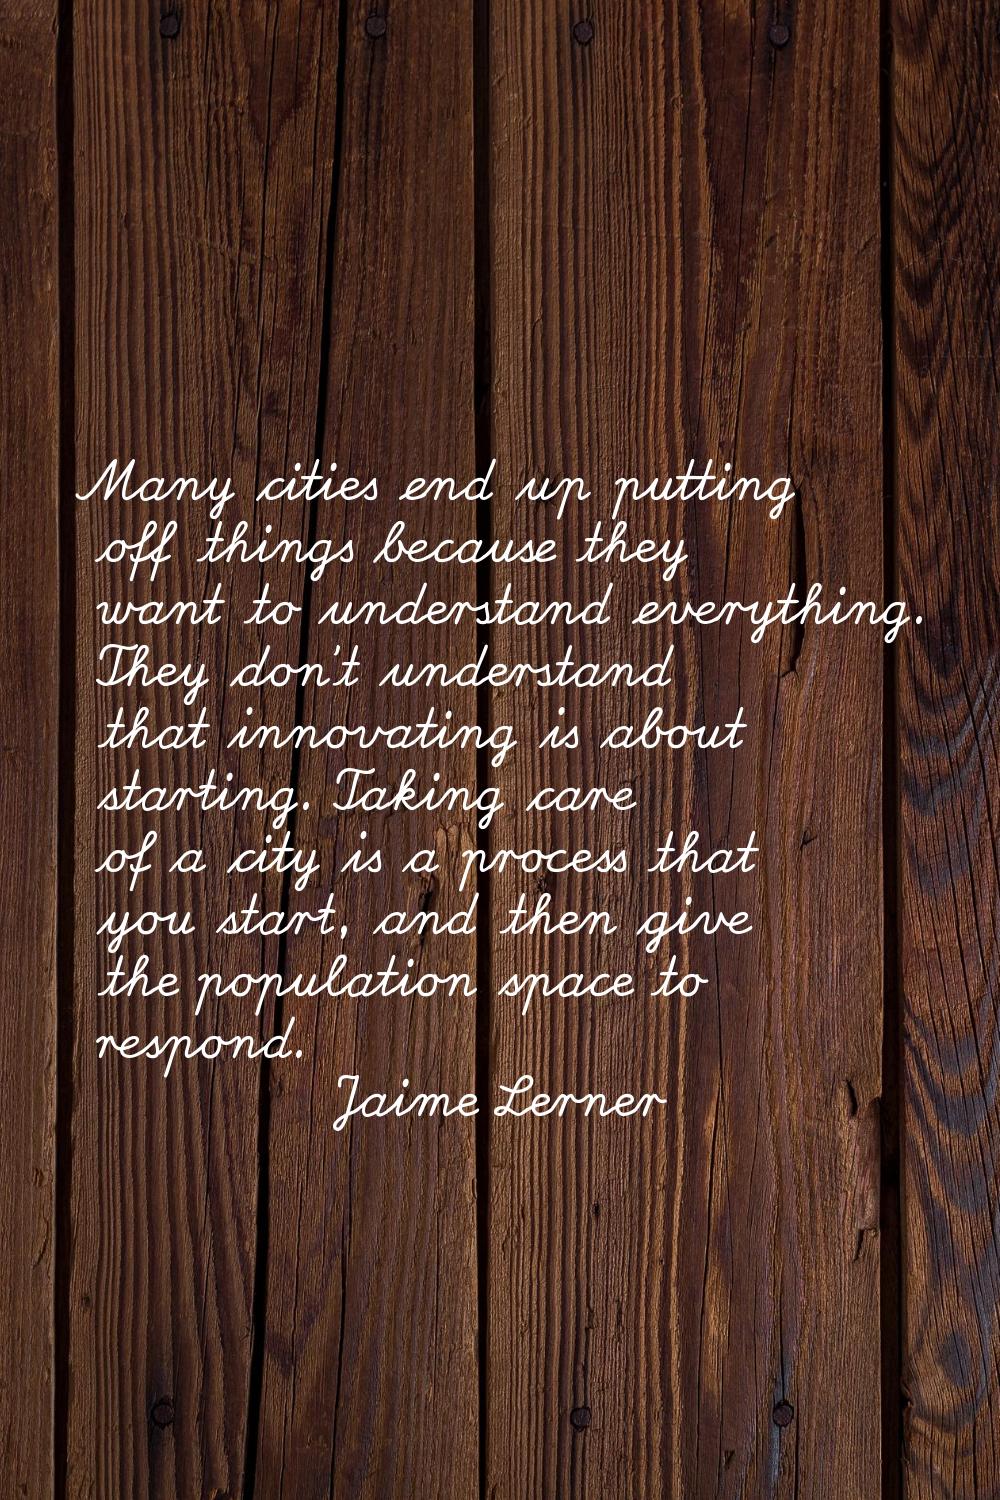 Many cities end up putting off things because they want to understand everything. They don't unders